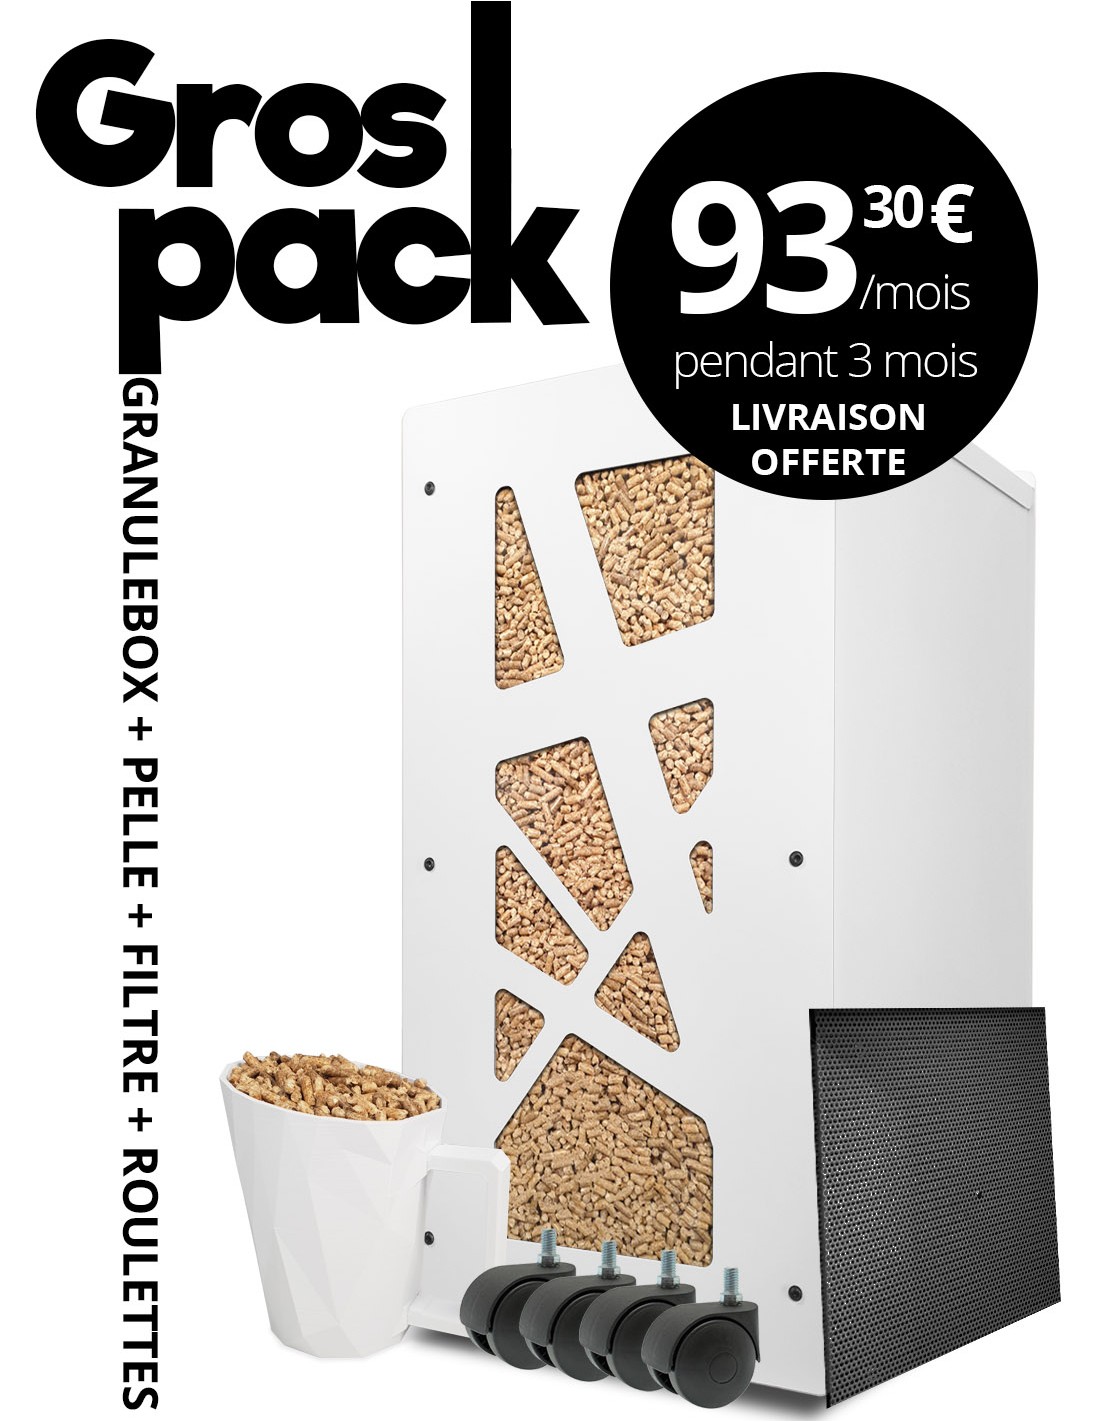 Gros pack stockage pellets Archi Blanc